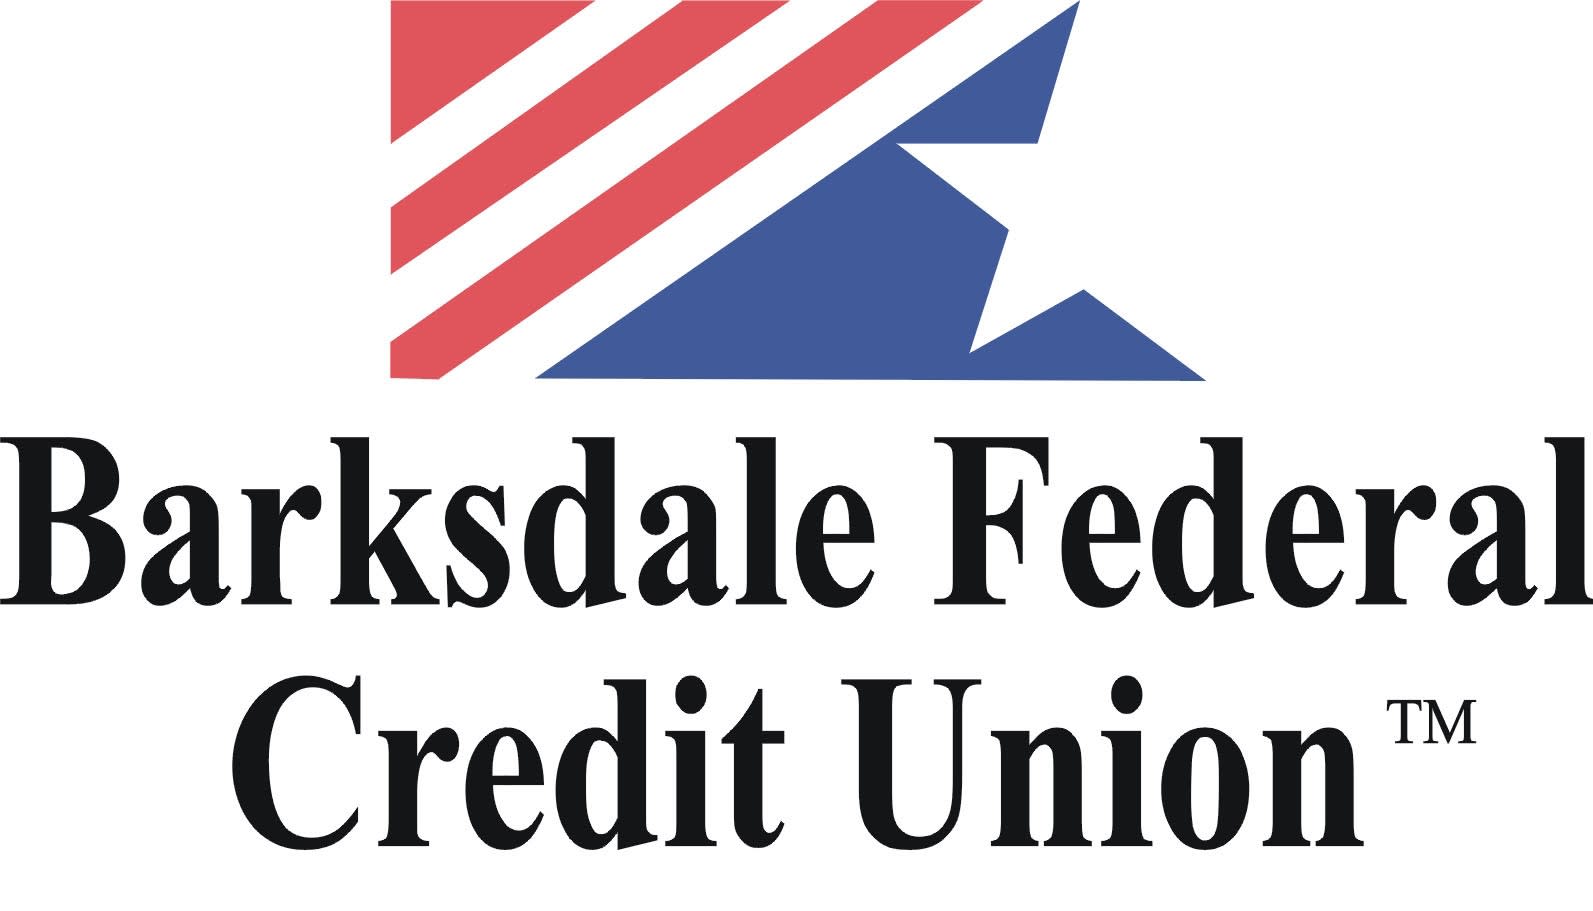 Barksdale Federal Credit Union - Youree Dr.